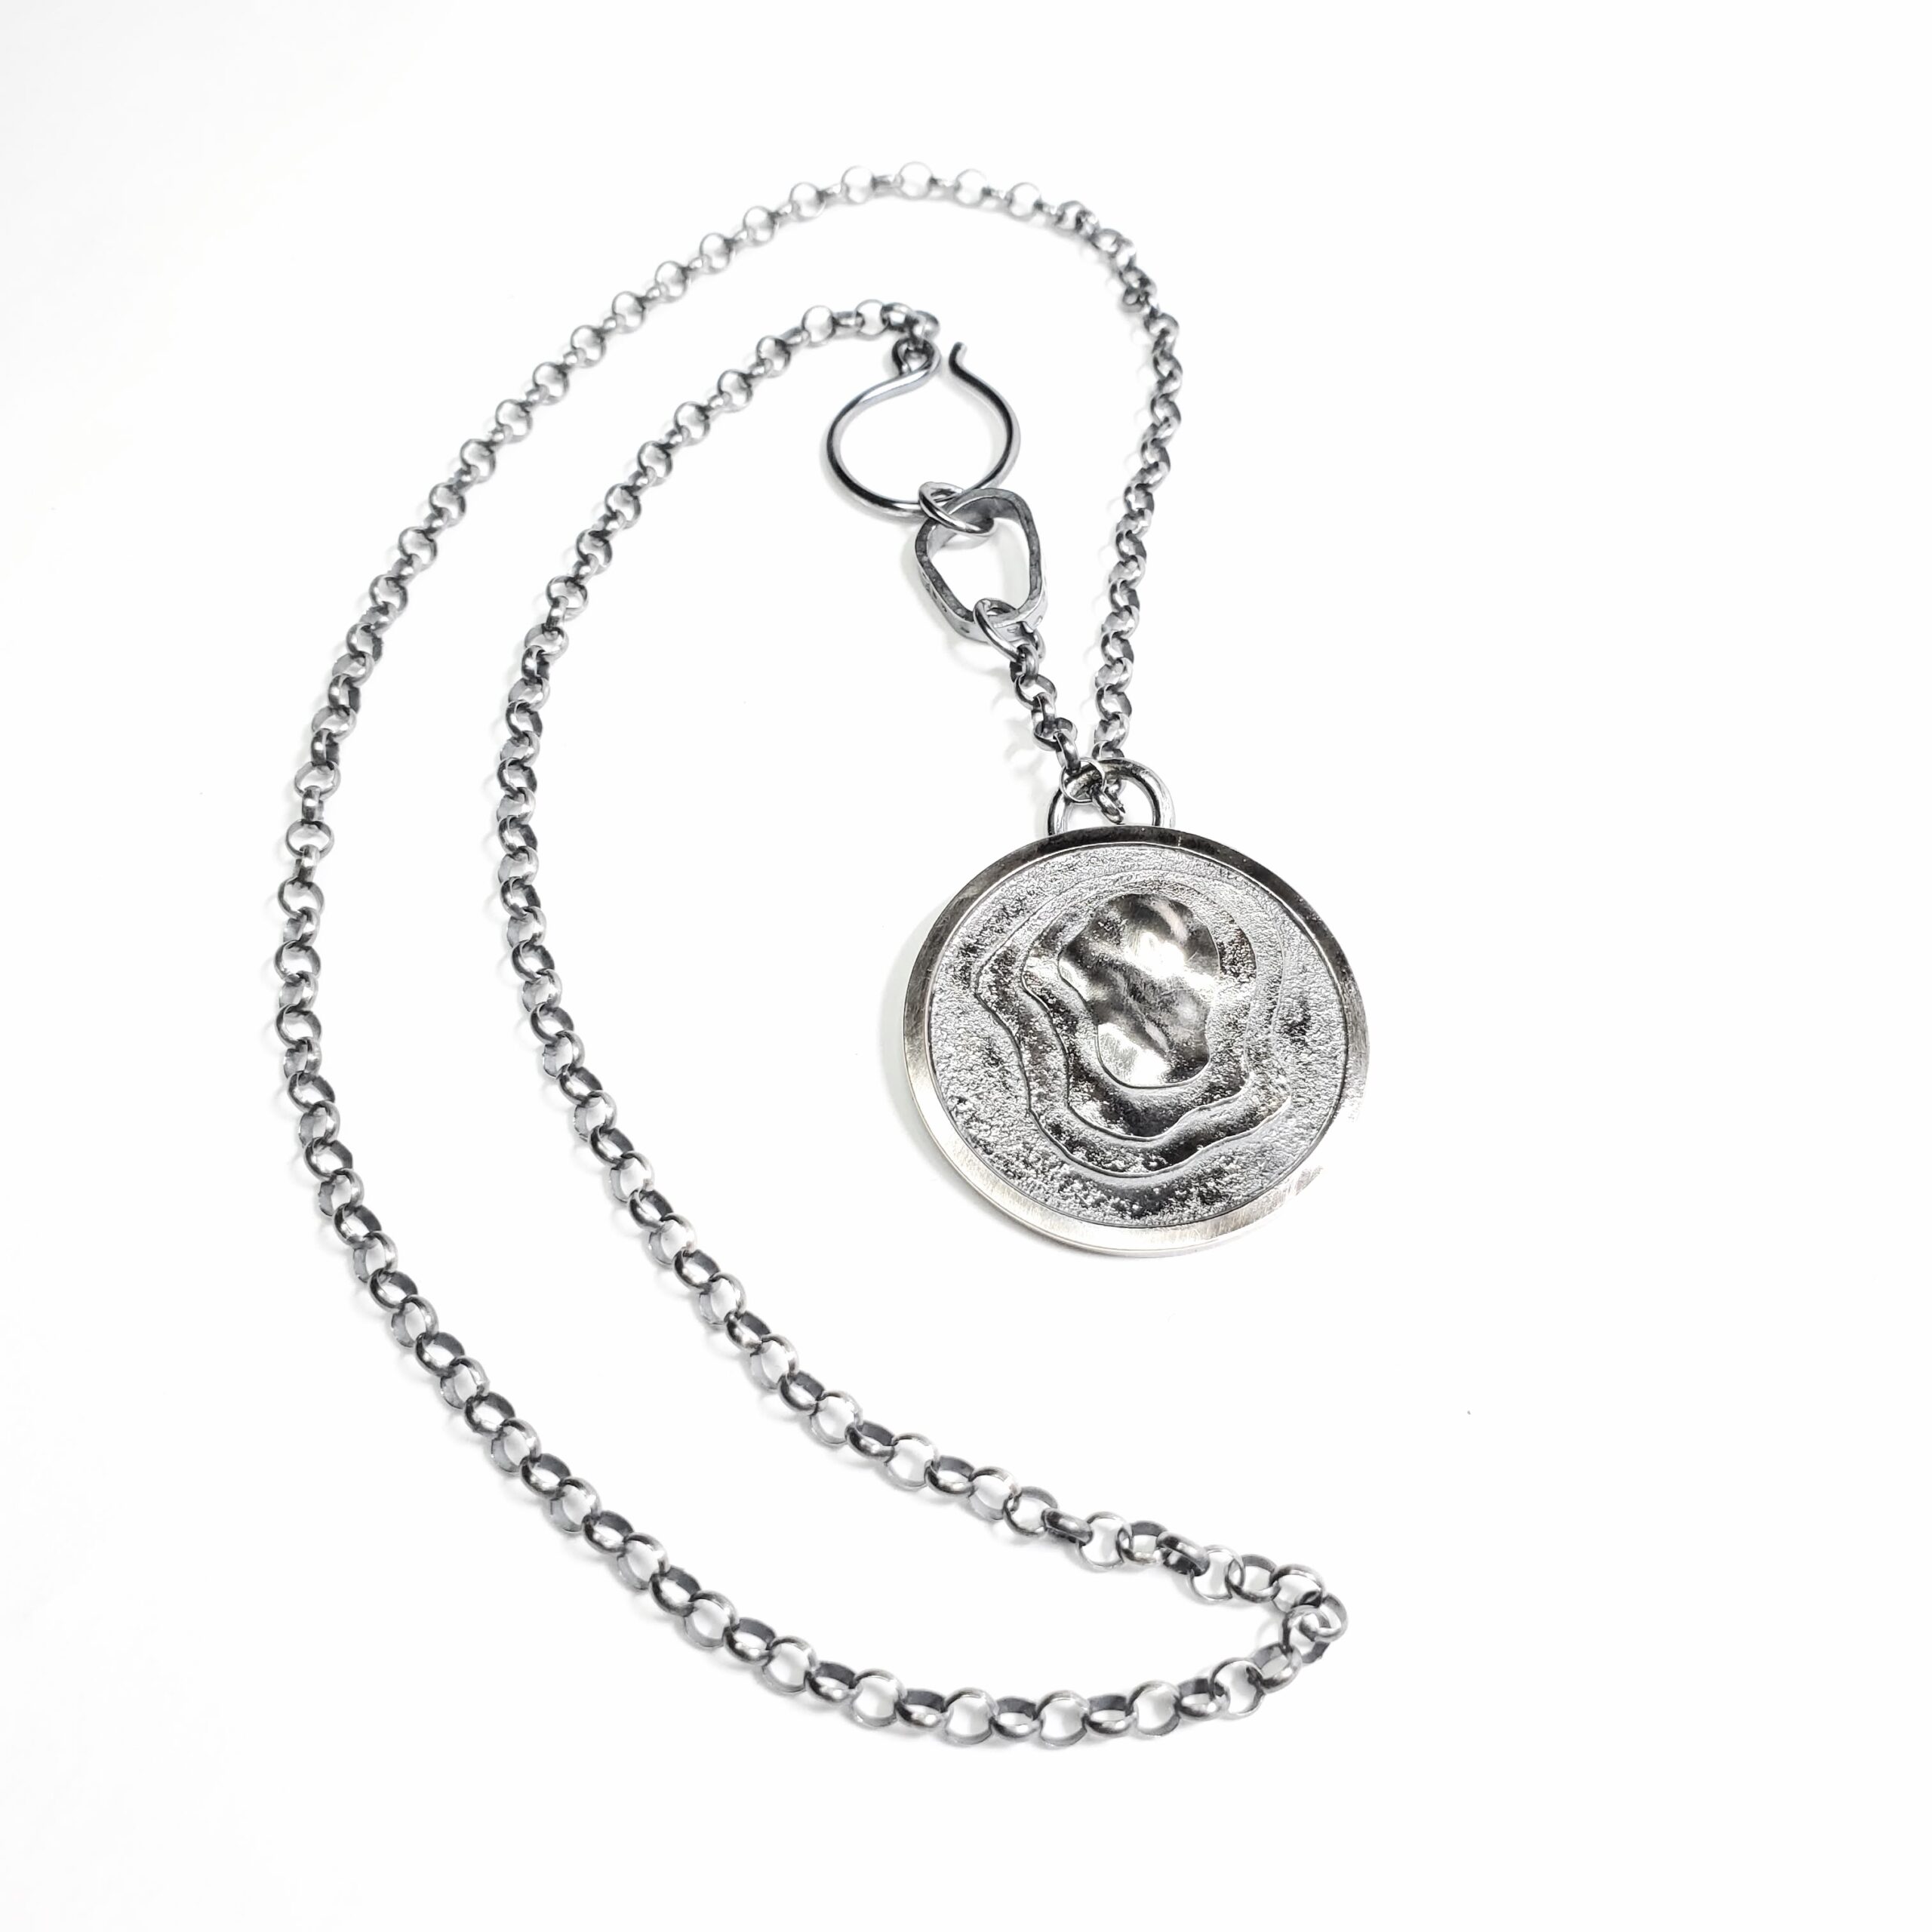 A round pendant and necklace from the terrane series